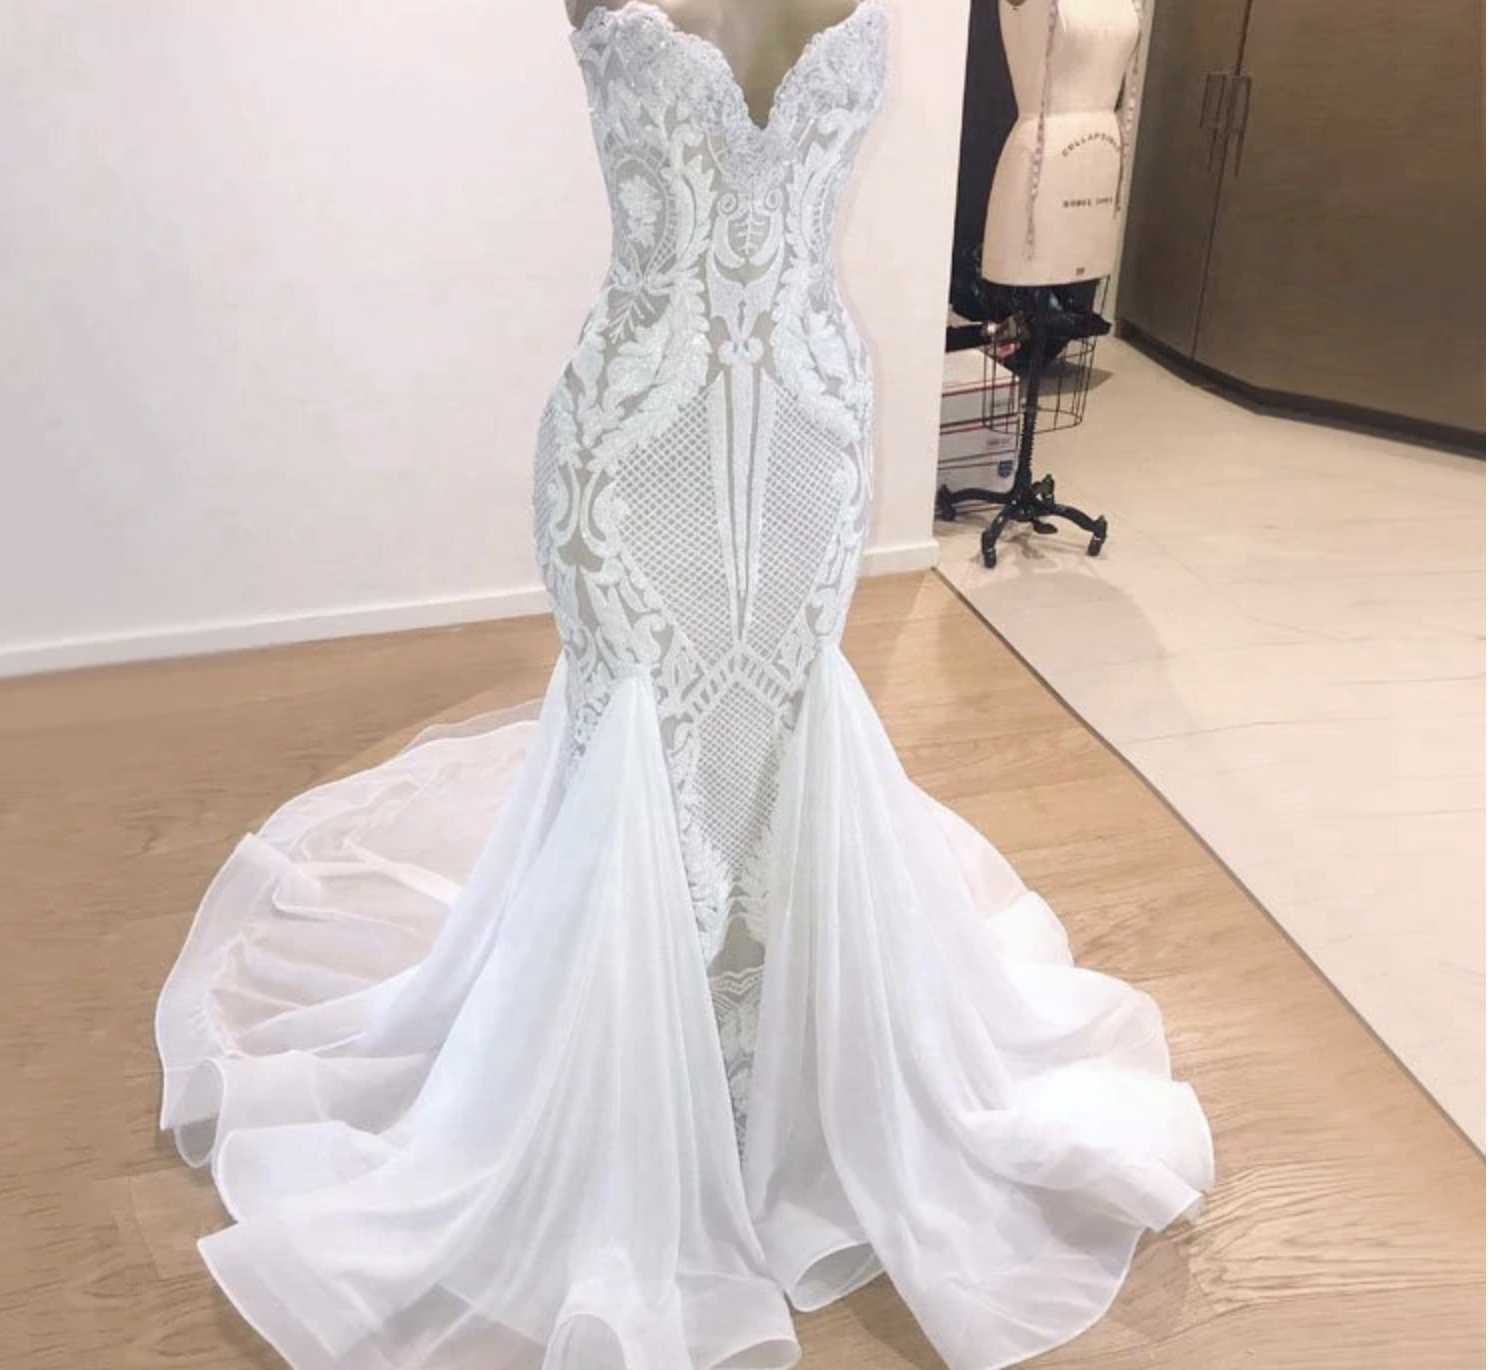 Wedding Dresses With Bling Shop, 53 ...